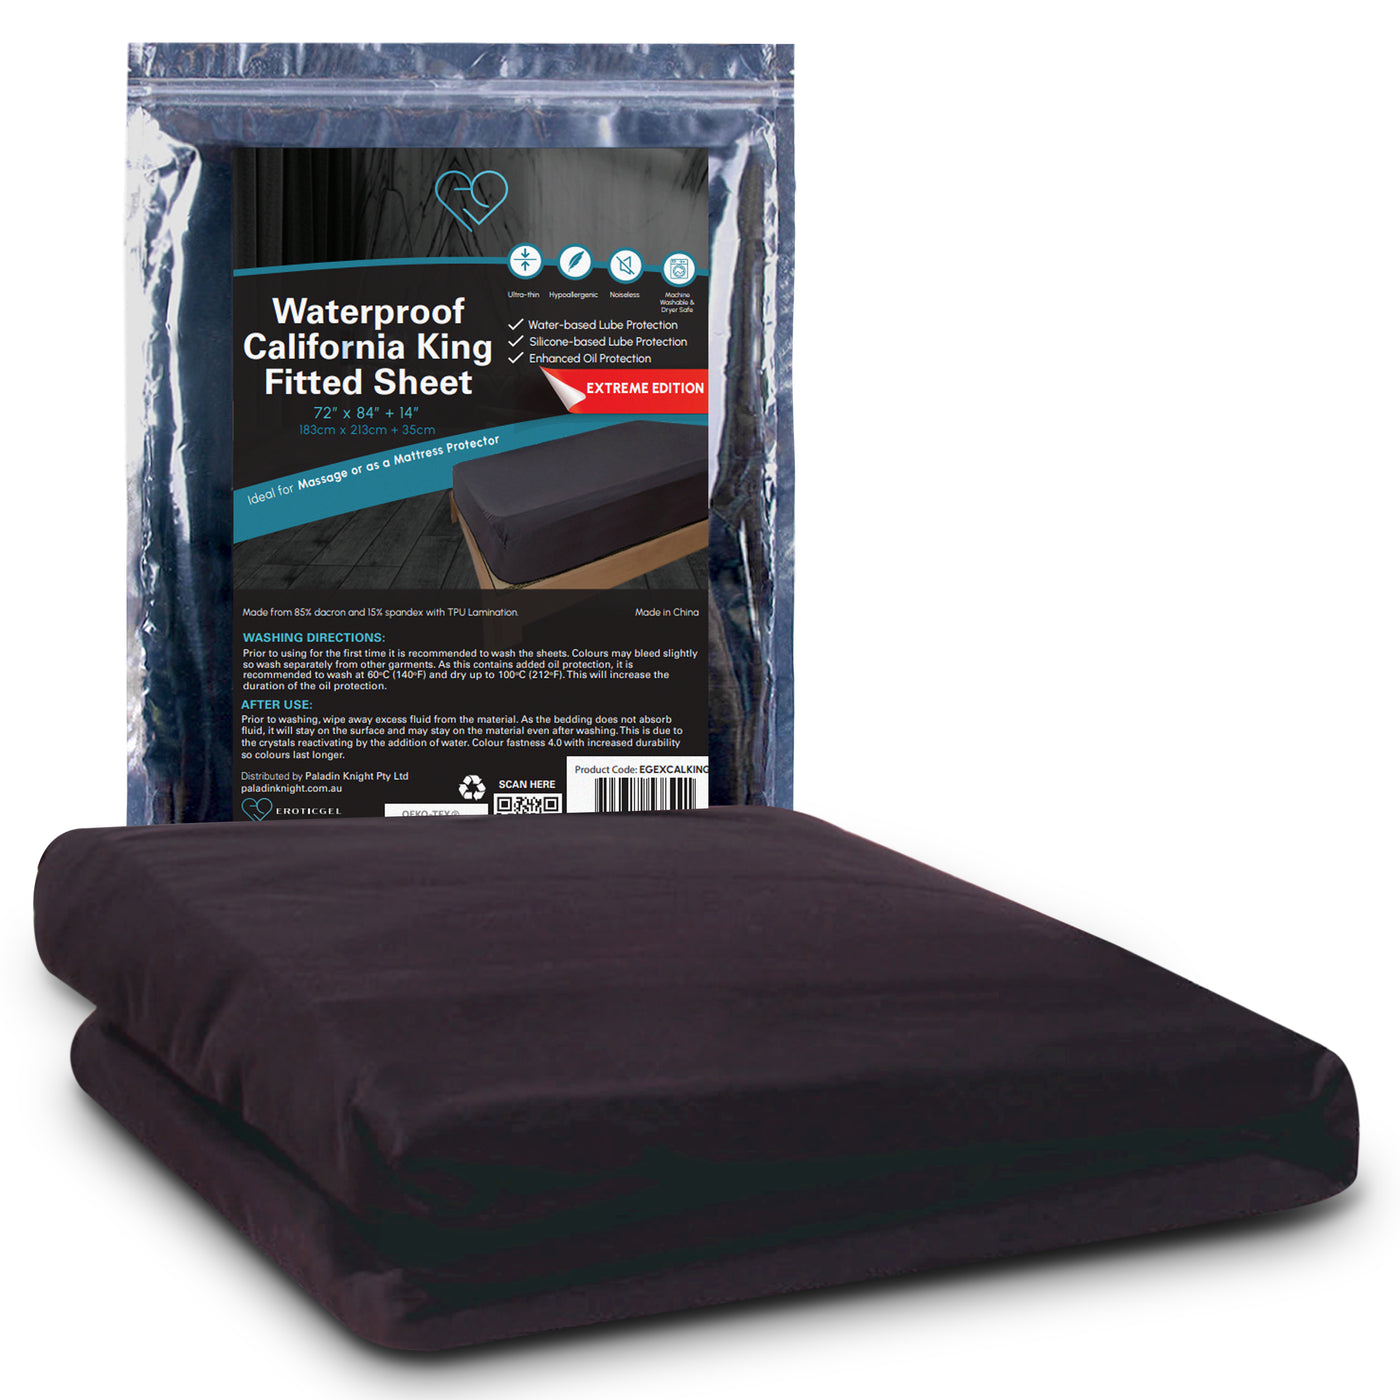 Eroticgel California King Waterproof Fitted Sheet EXTREME Edition 183cm x 213cm + 35cm (72''x84''+14'')